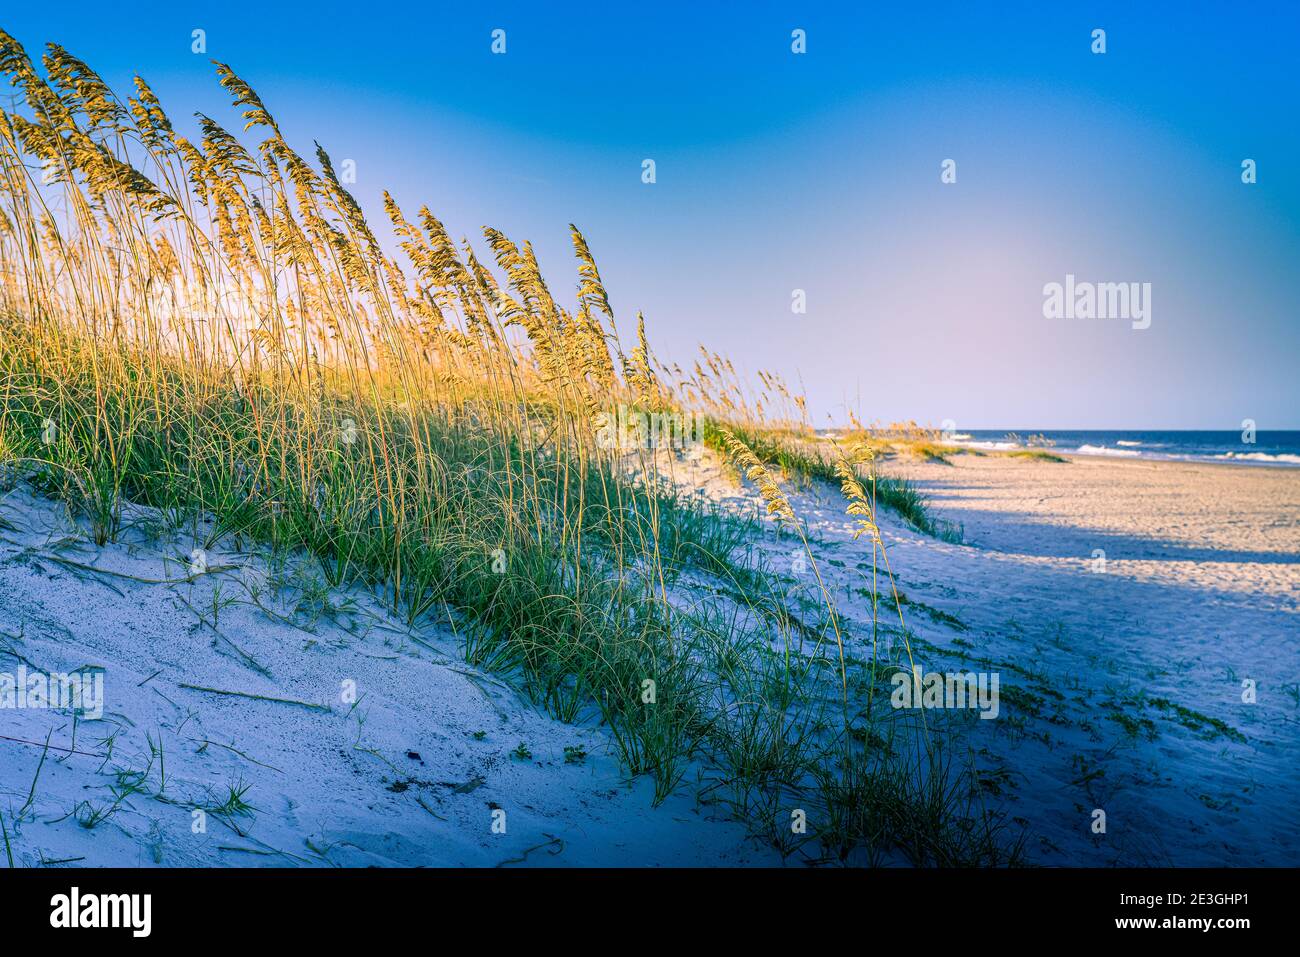 A serene view of sea grass covering the dunes in foreground with a distant Atlantic Ocean on Fernandina Beach, on Amelia Island, FL Stock Photo